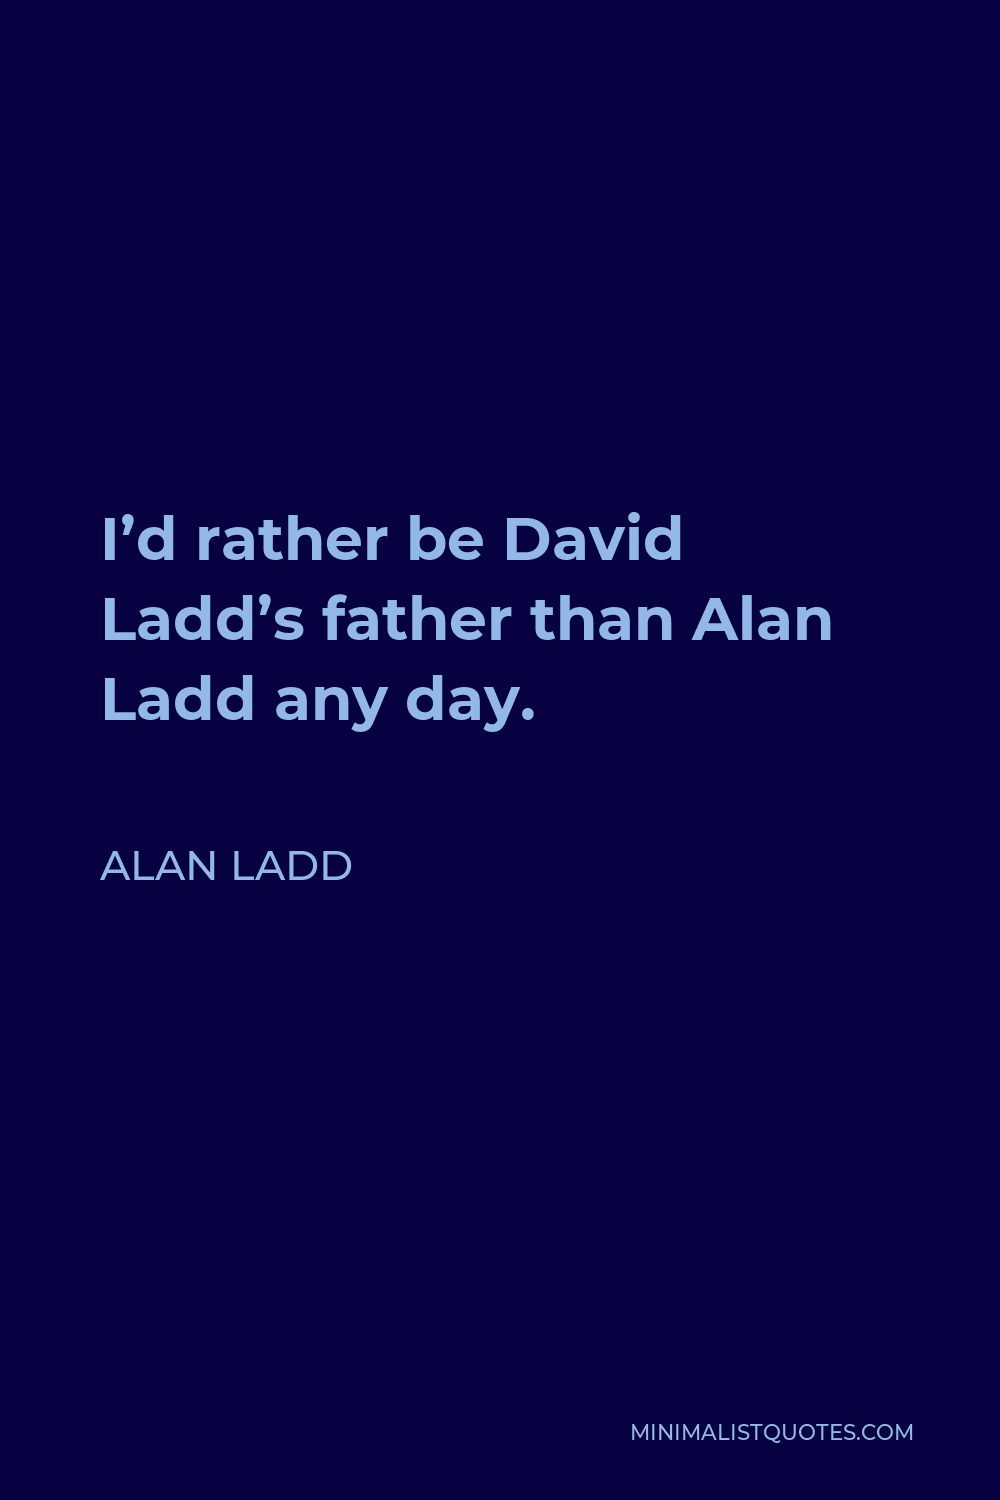 Alan Ladd Quote - I’d rather be David Ladd’s father than Alan Ladd any day.